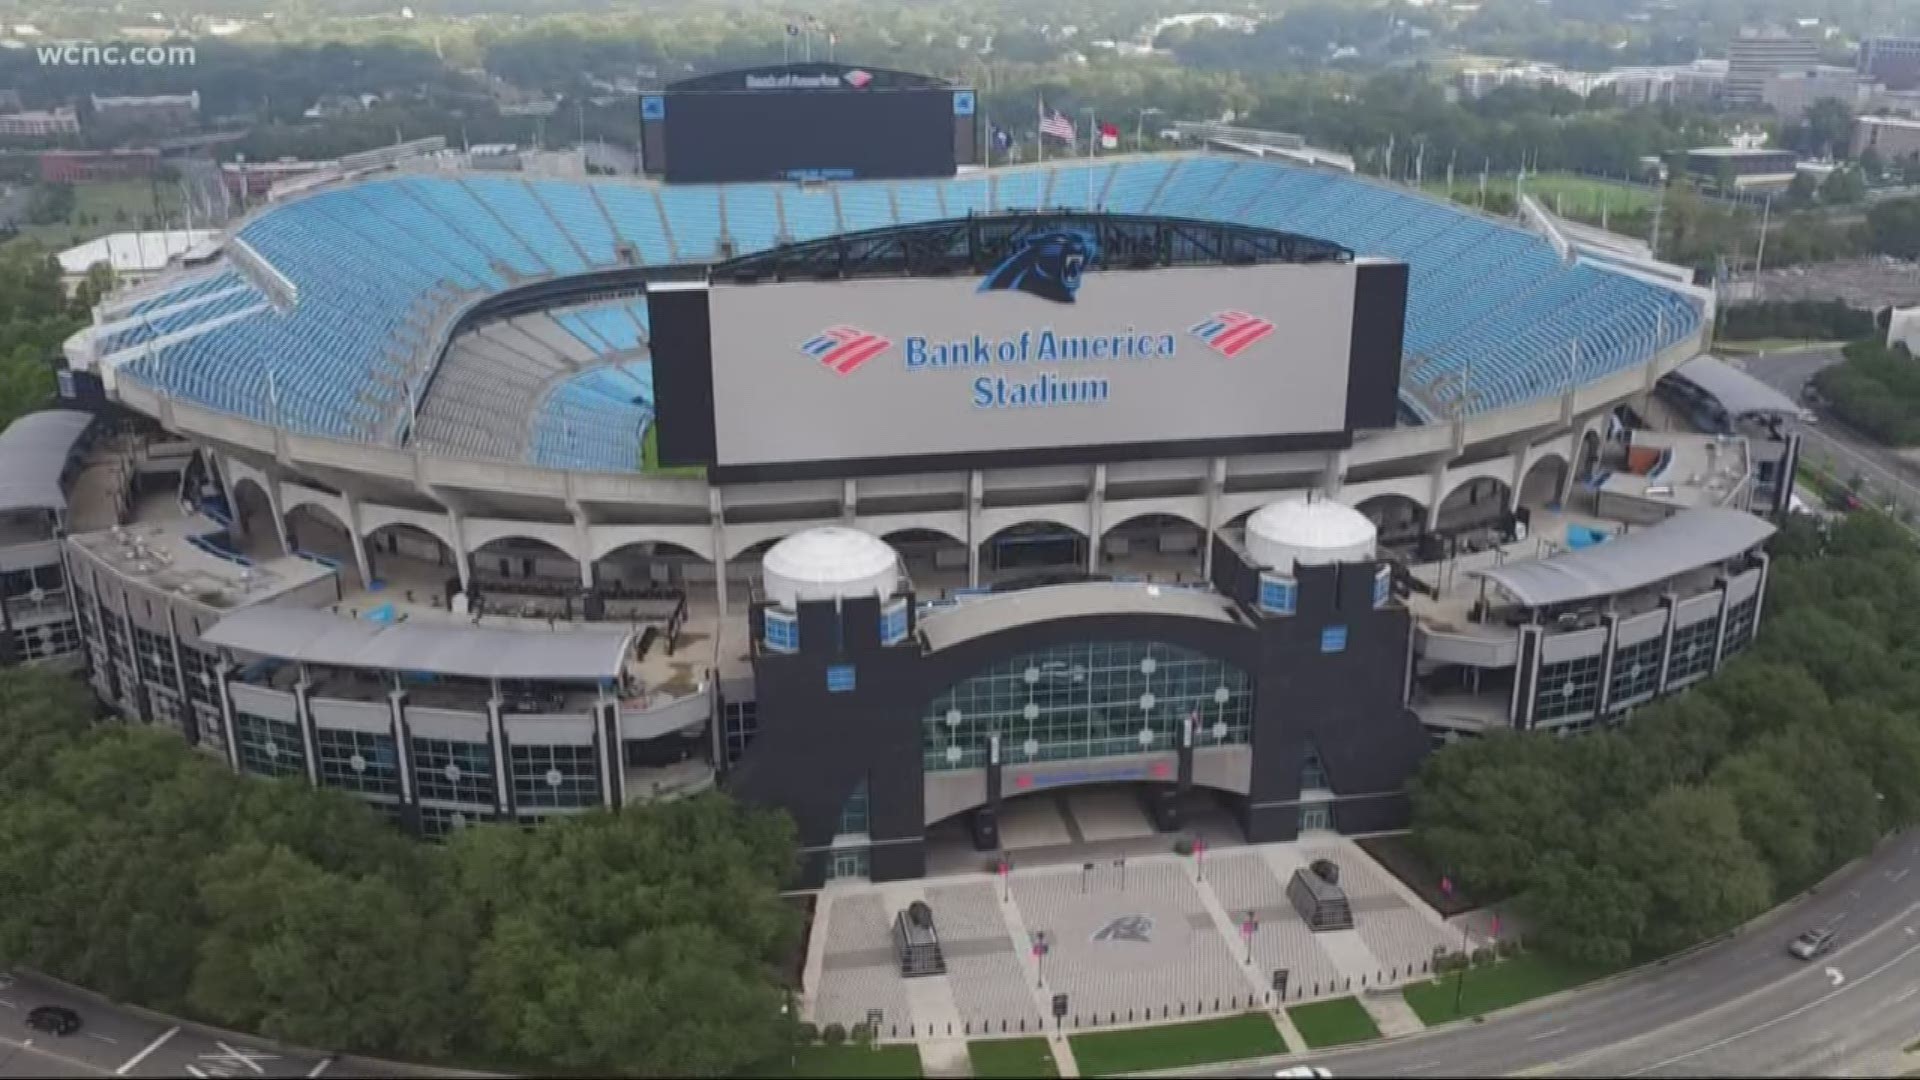 Work is getting underway at Bank of America Stadium to make way for the new MLS team. County records show a building permit was issued for the stadium.